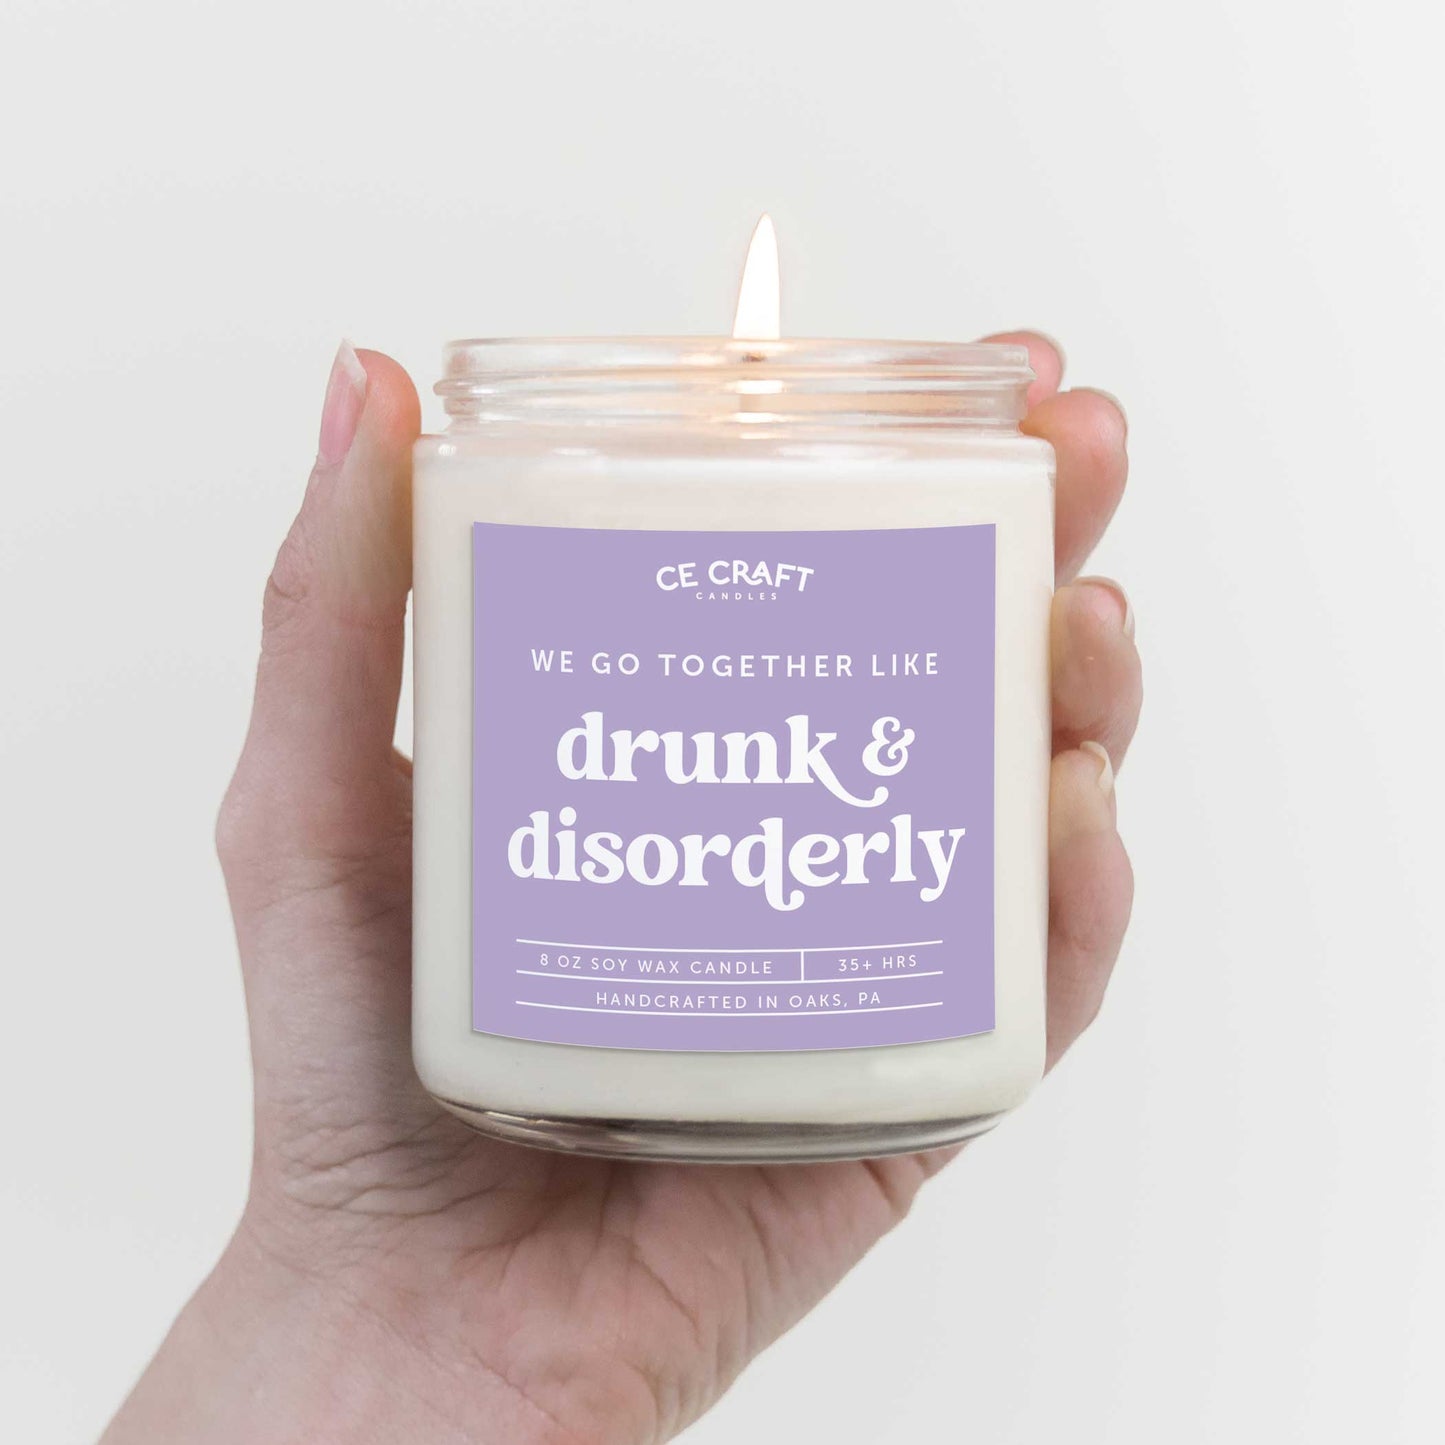 We Go Together Like Drunk & Disorderly Soy Wax Candle Candle CE Craft 